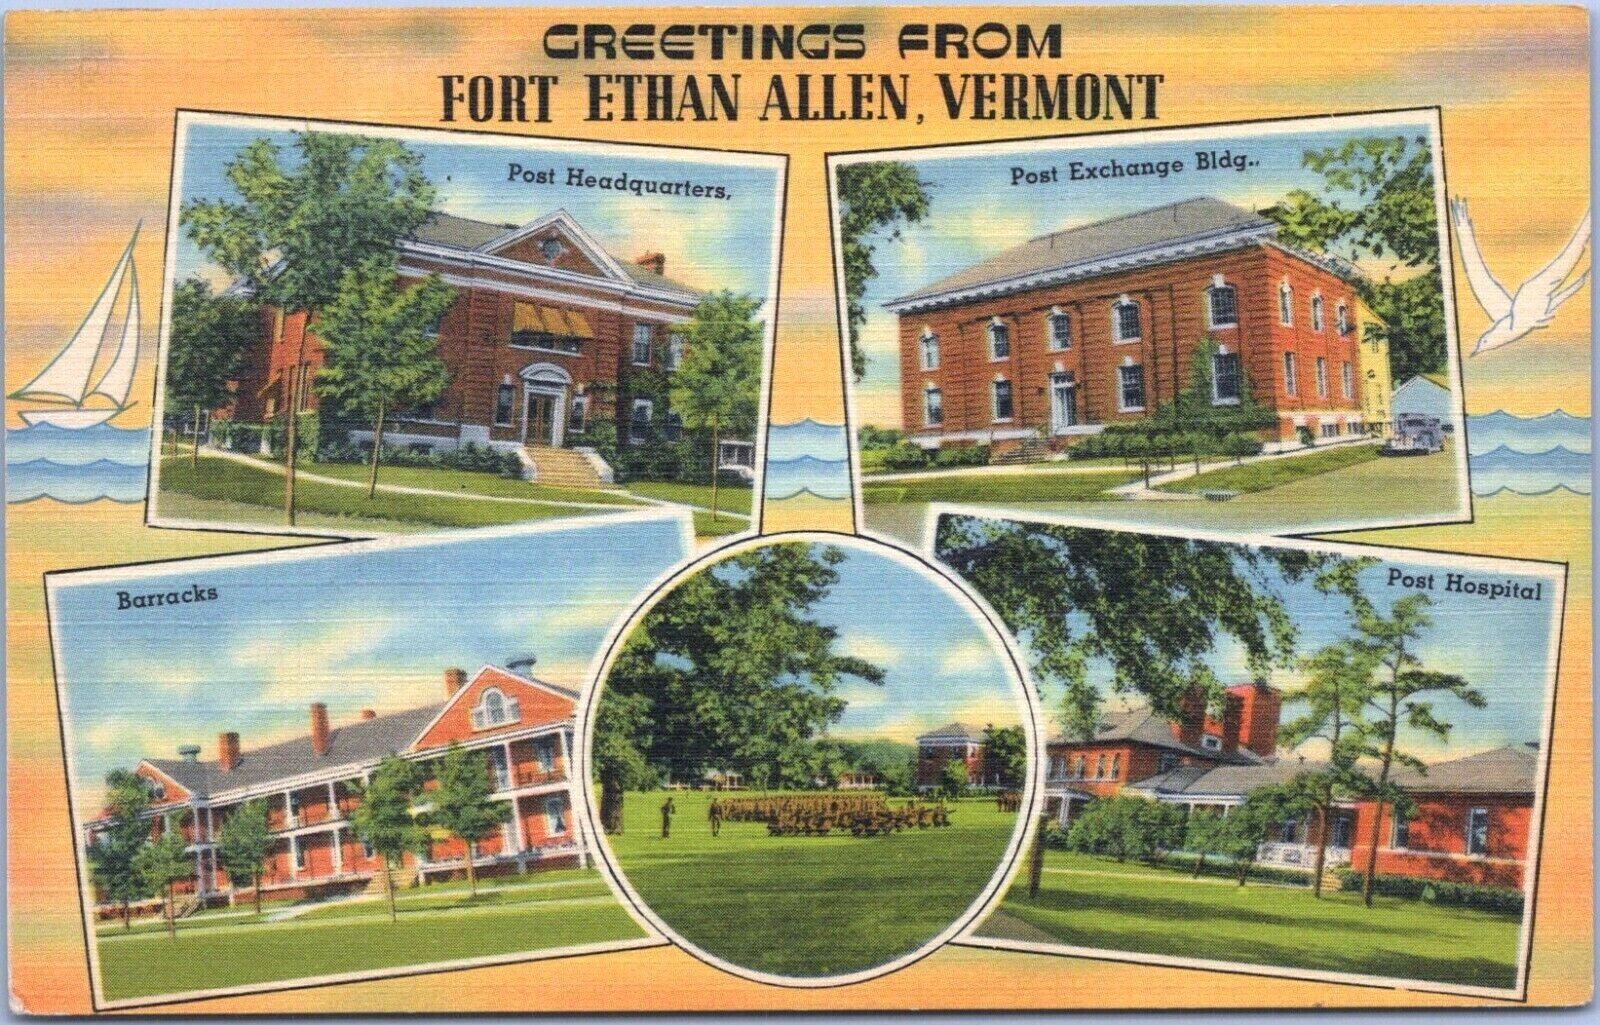 Postcard VT Fort Ethan Allen Greetings Army Post Multi Scene View Vermont 